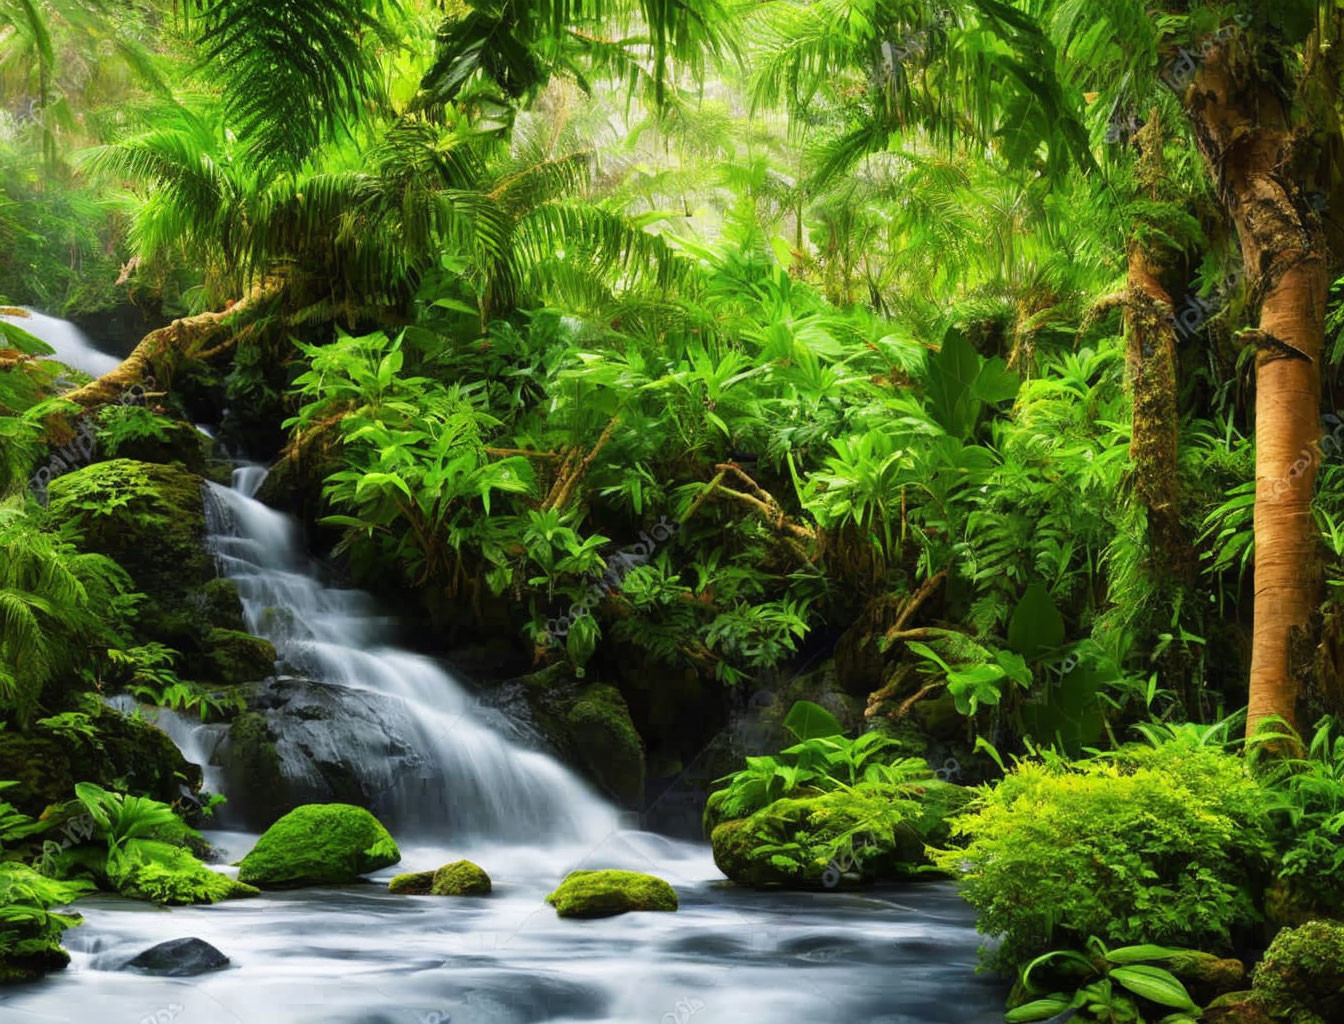 Tropical forest with small waterfall and lush greenery